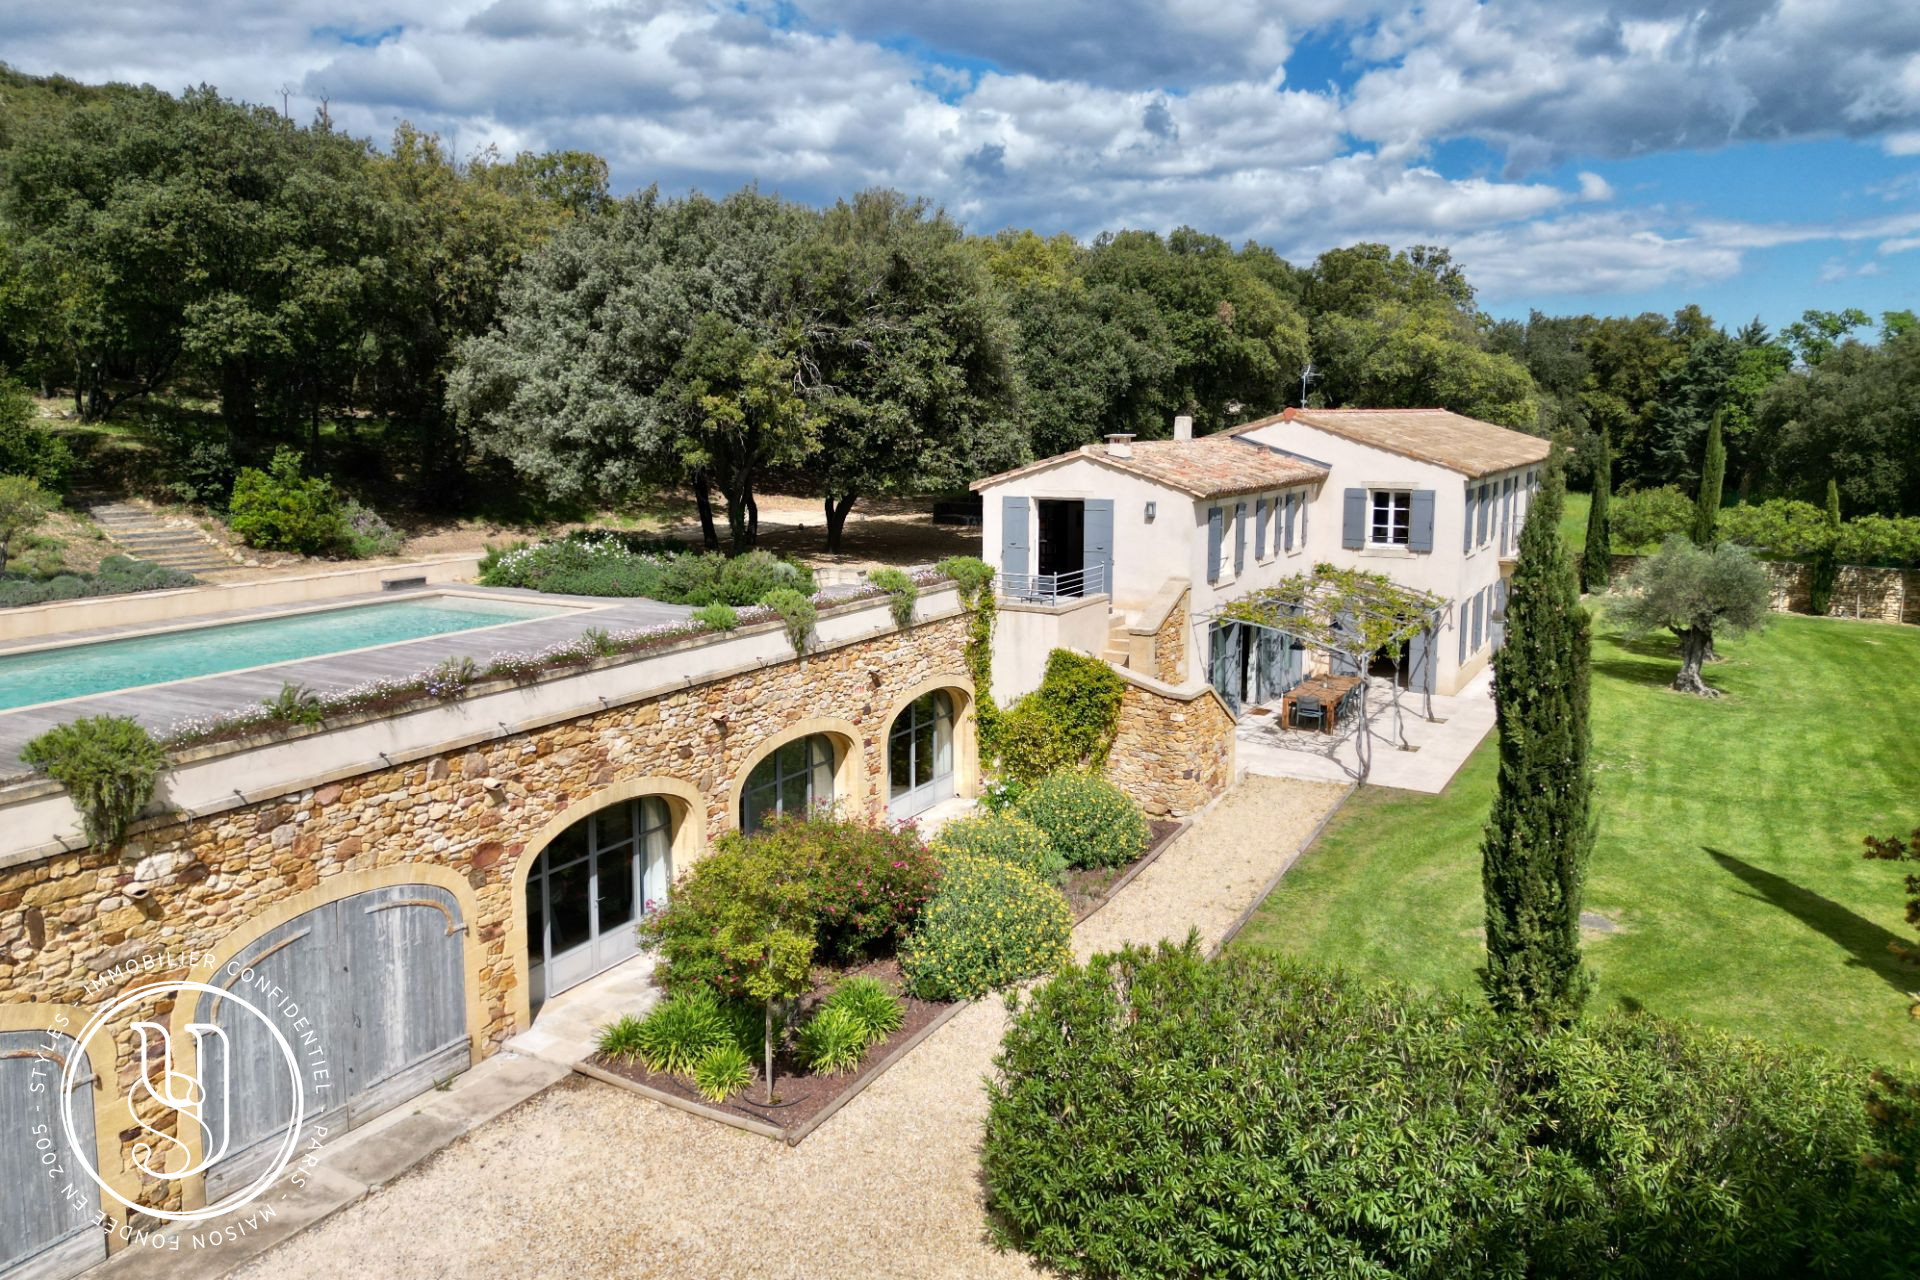 Uzès - nearby - an old house with perfect renovation, in the greenery - image 18